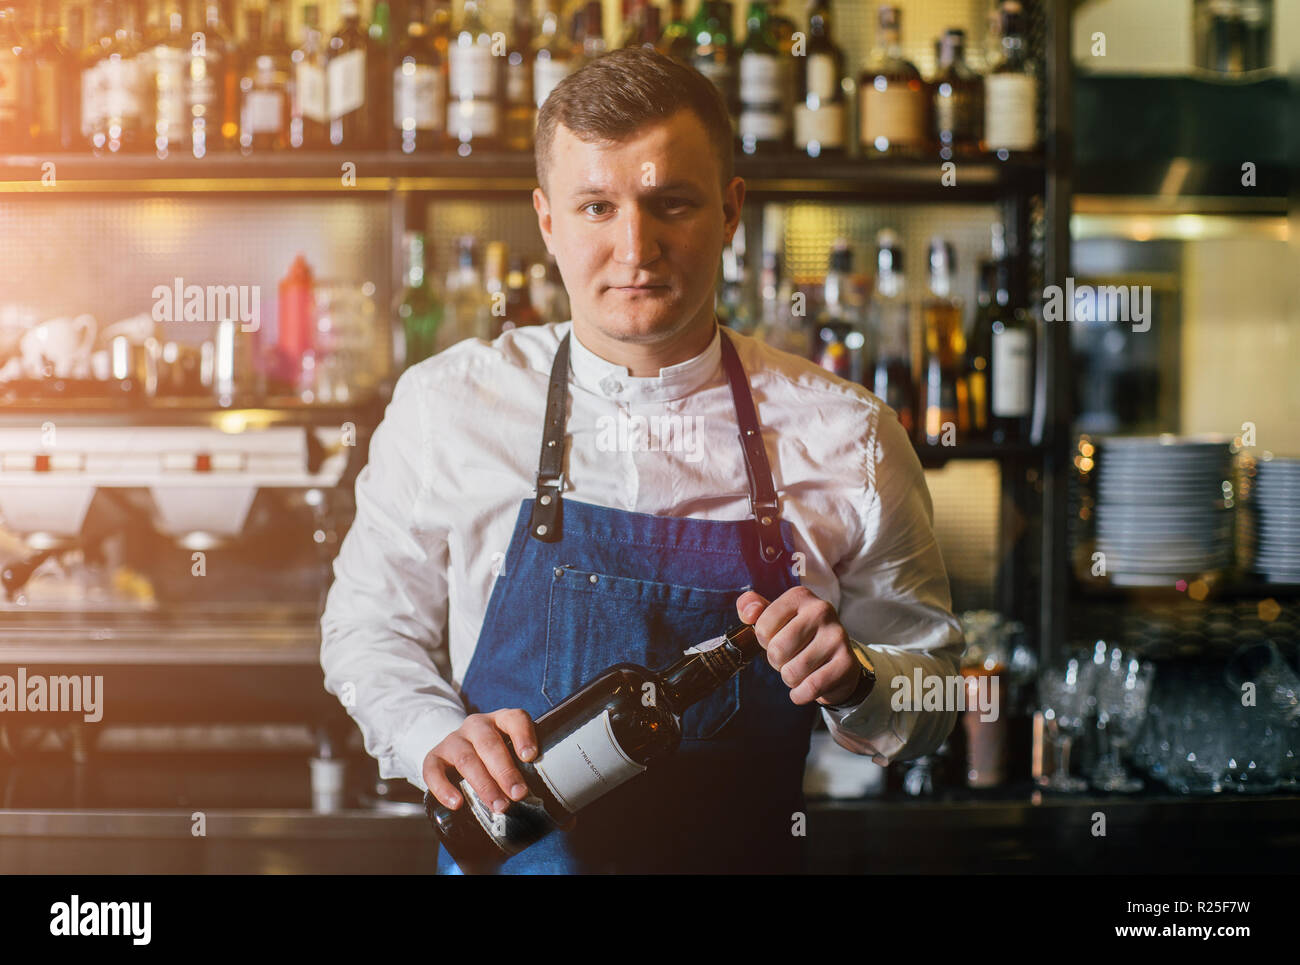 Bartender professionally working with om making drinks and cocktails Stock Photo